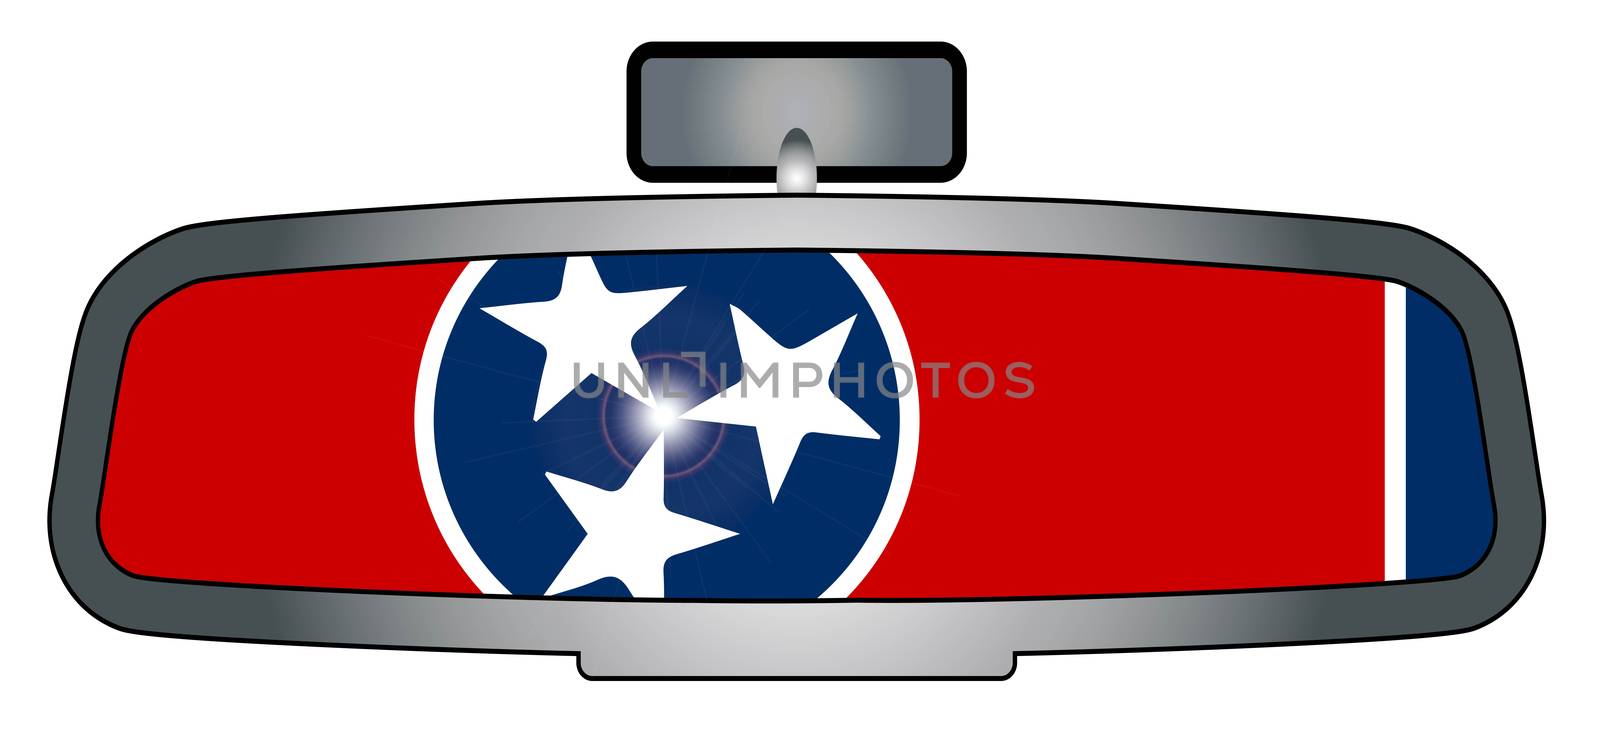 A vehicle rear view mirror with the flag of Tennessee